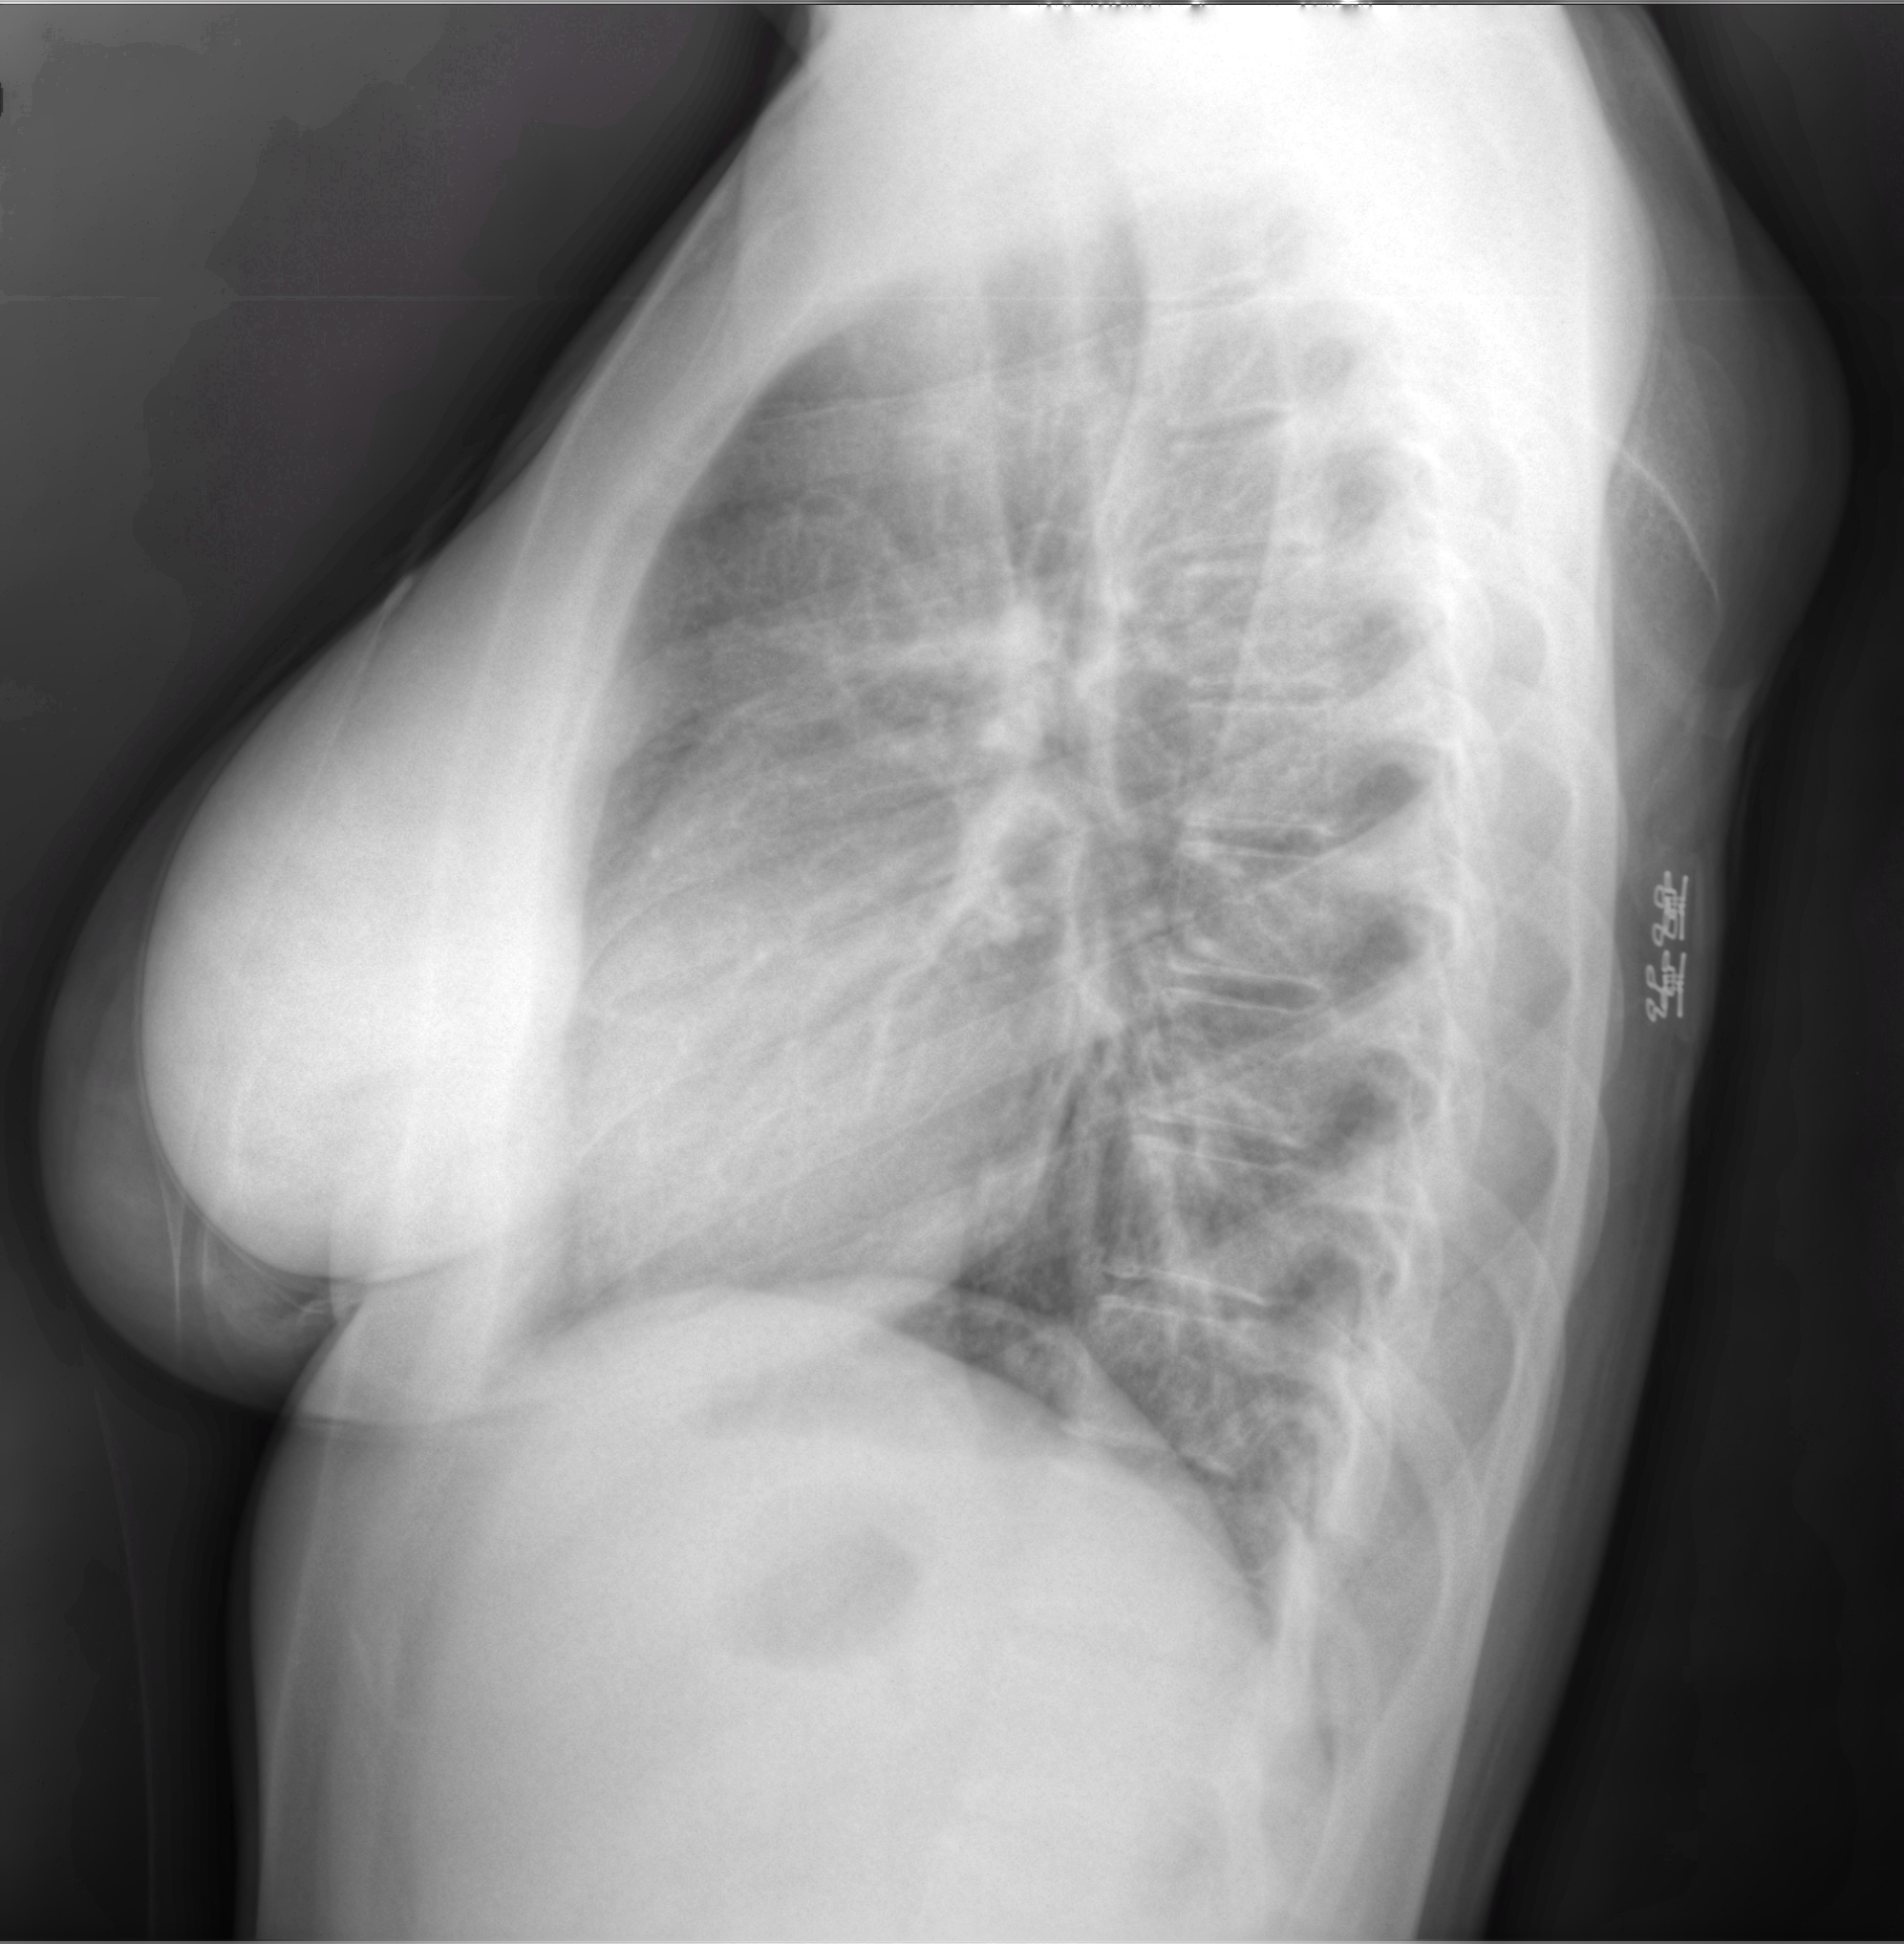 The use of x-rays for diagnostic examination of the breast was introduced in by Stafford Warren. His technique involved the patient lying on her side with her arm raised and having the picture taken from the side.11Warren, S.L. "A Roentgenologic Study of the Breast." The American Journal of Roentgenology and Radium Therapy. 24 (1930): 113-124.      